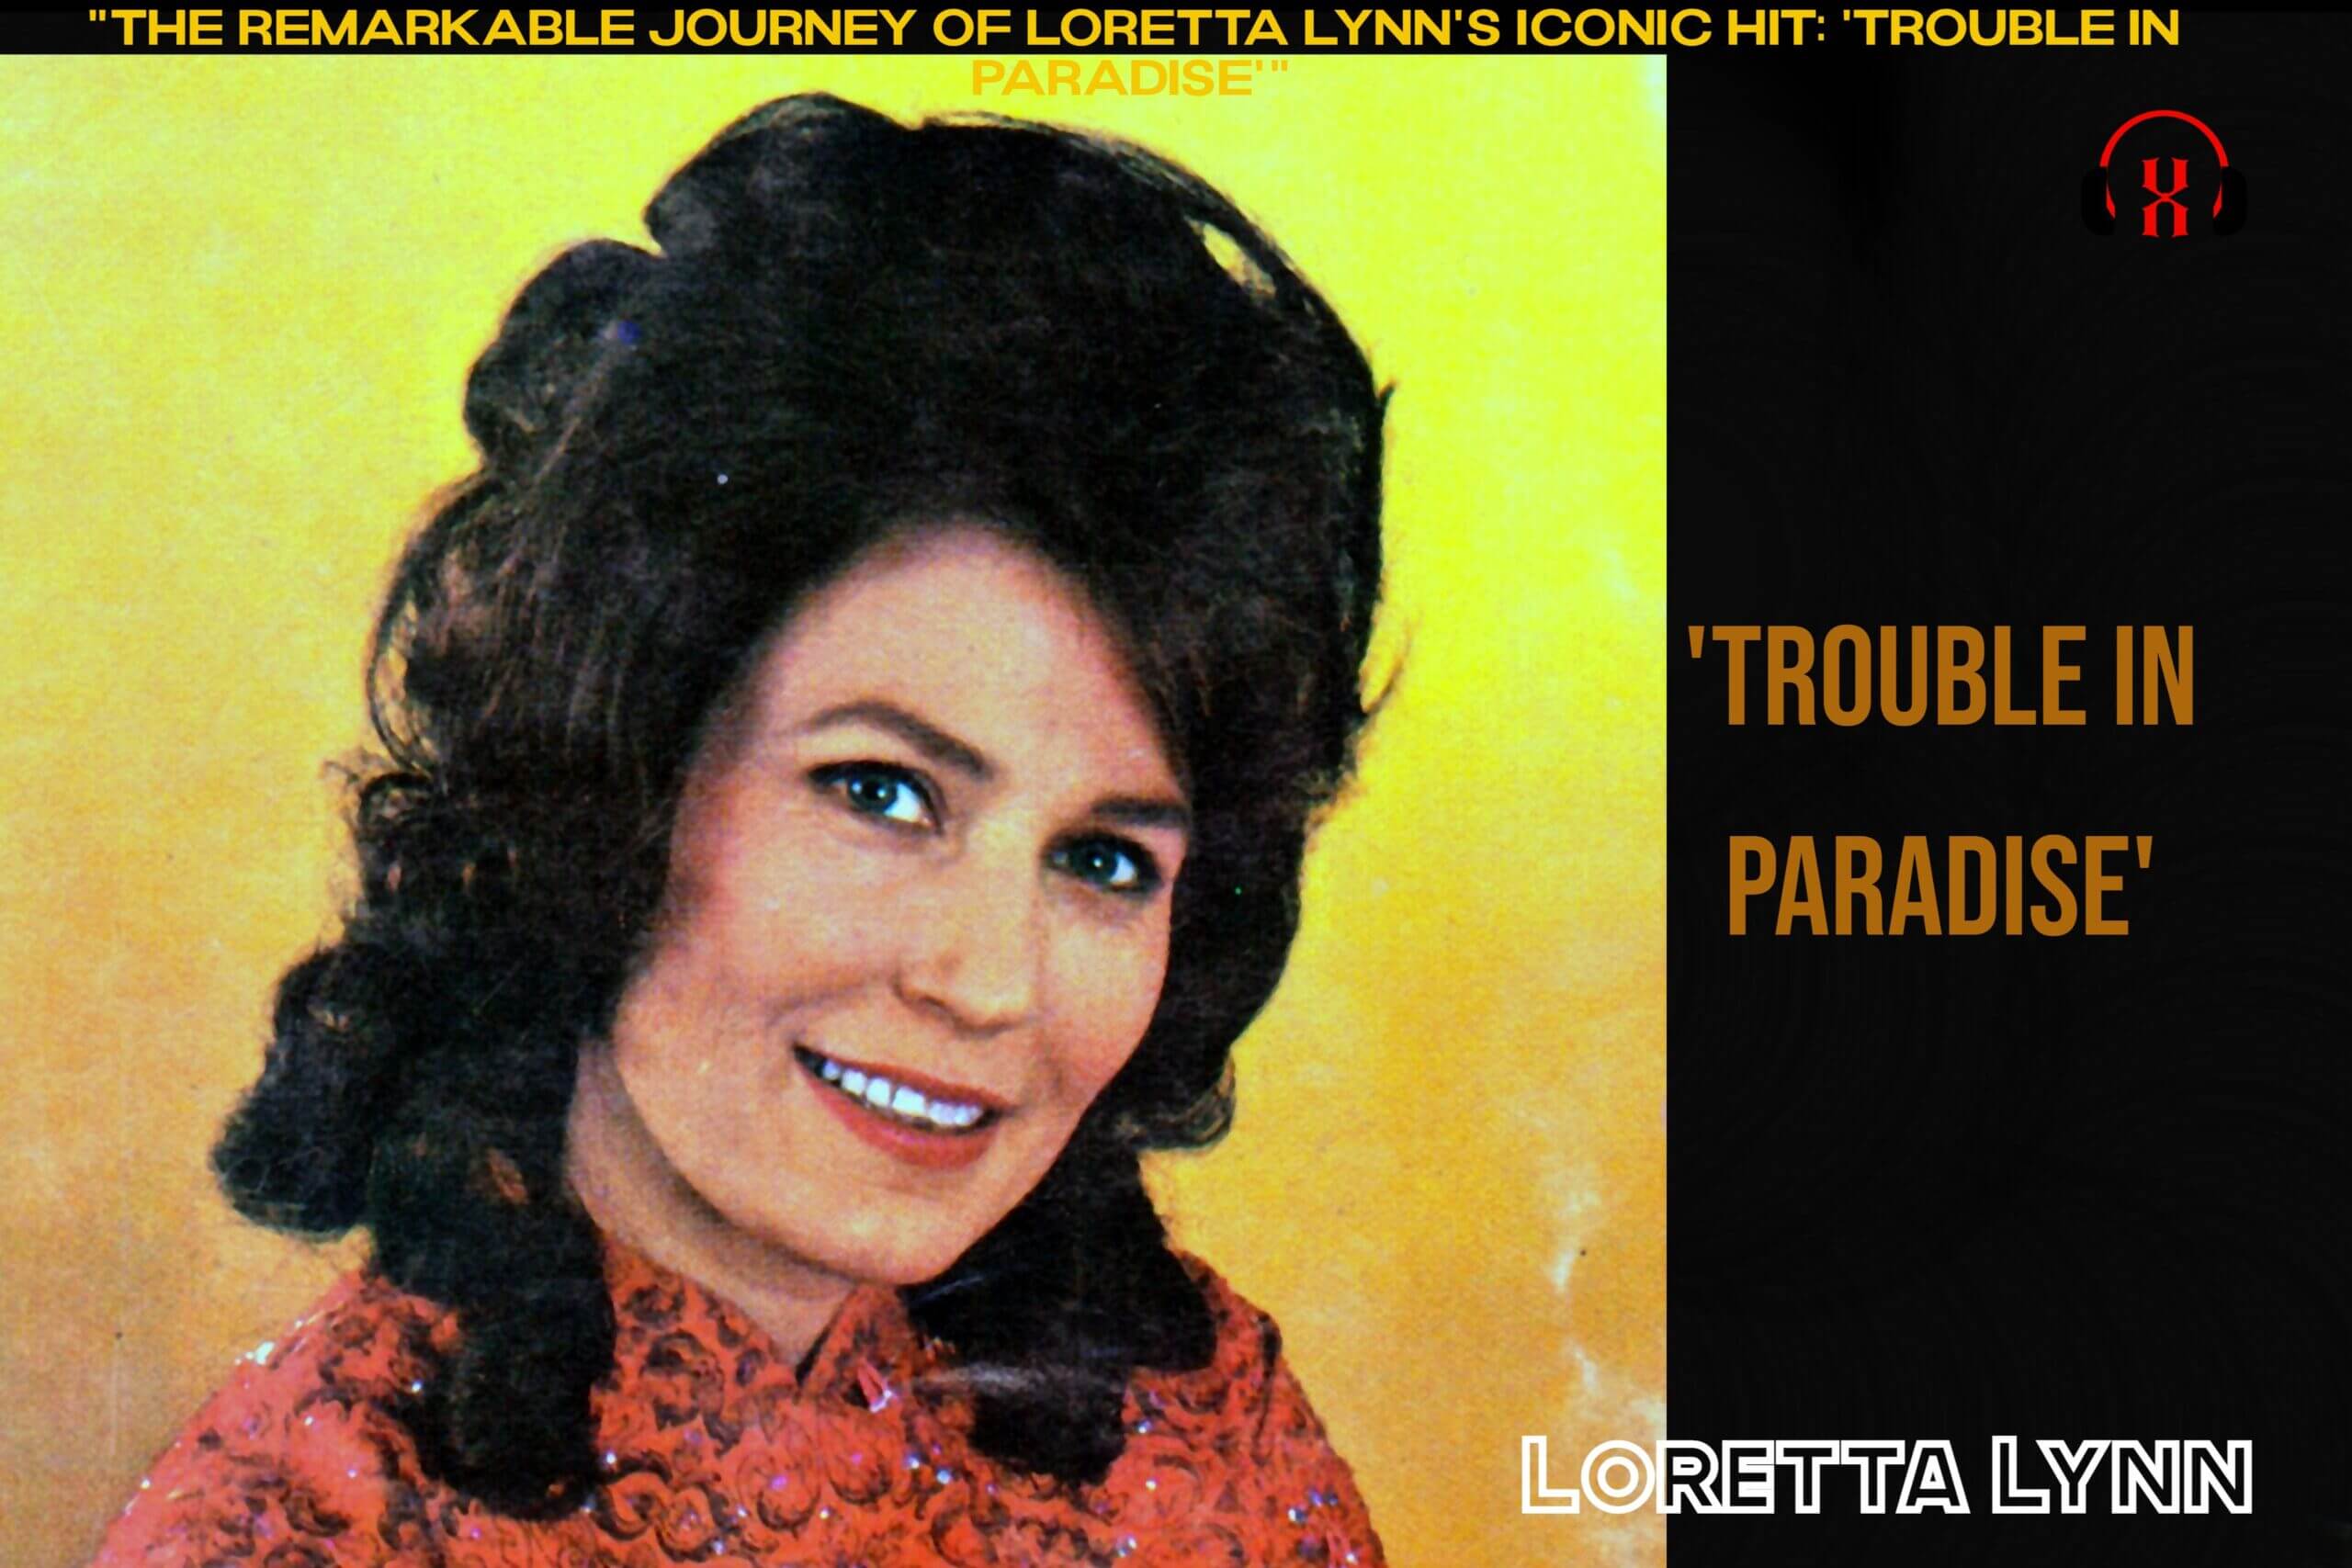 “The Remarkable Journey of Loretta Lynn’s Iconic Hit: ‘Trouble In Paradise'”